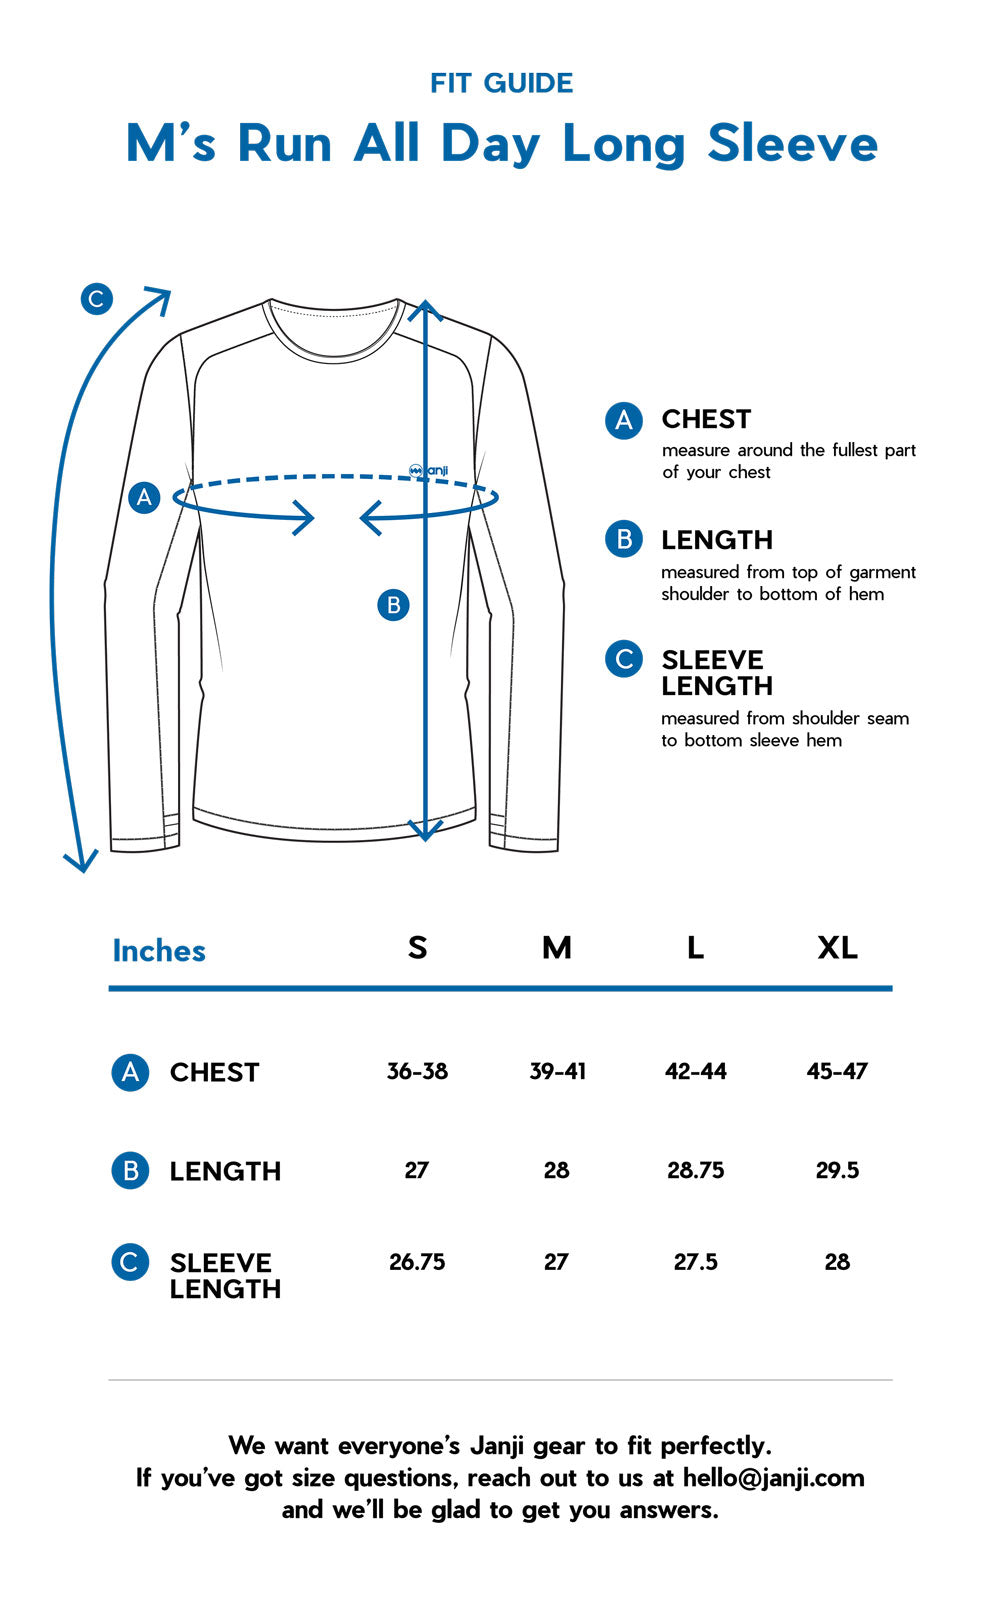 M's Run All Day Long Sleeve size guide